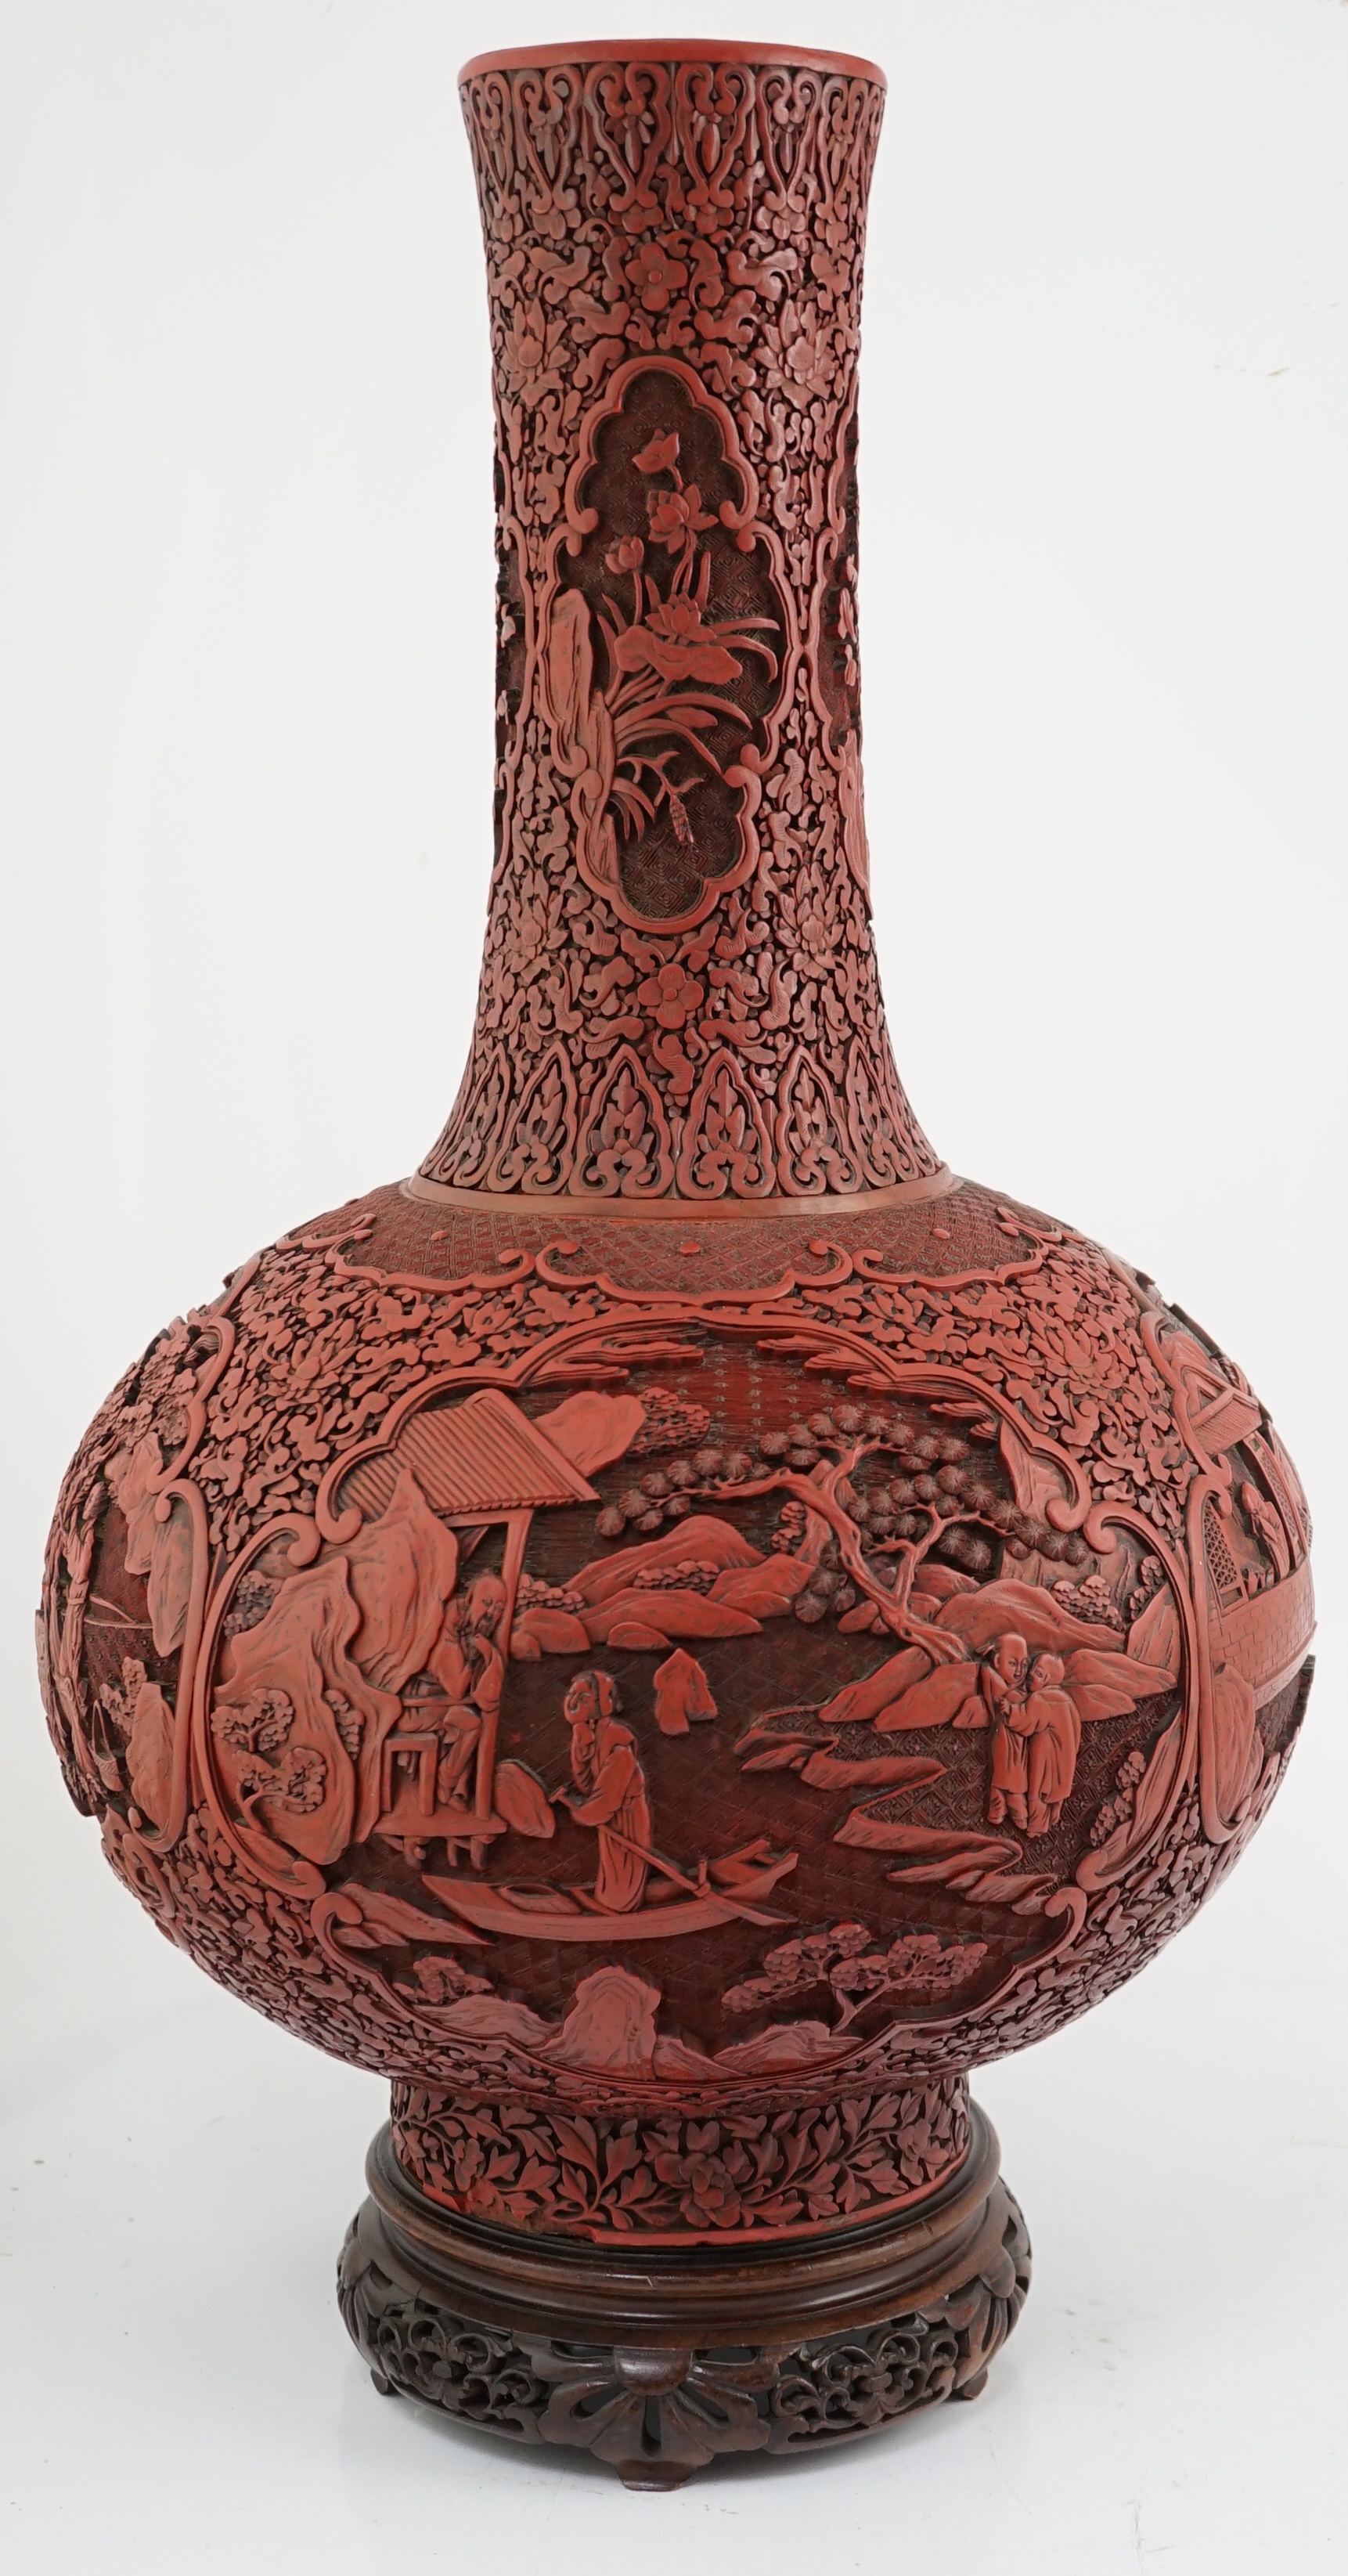 A large Chinese cinnabar lacquer bottle vase, 19th century, Some restoration